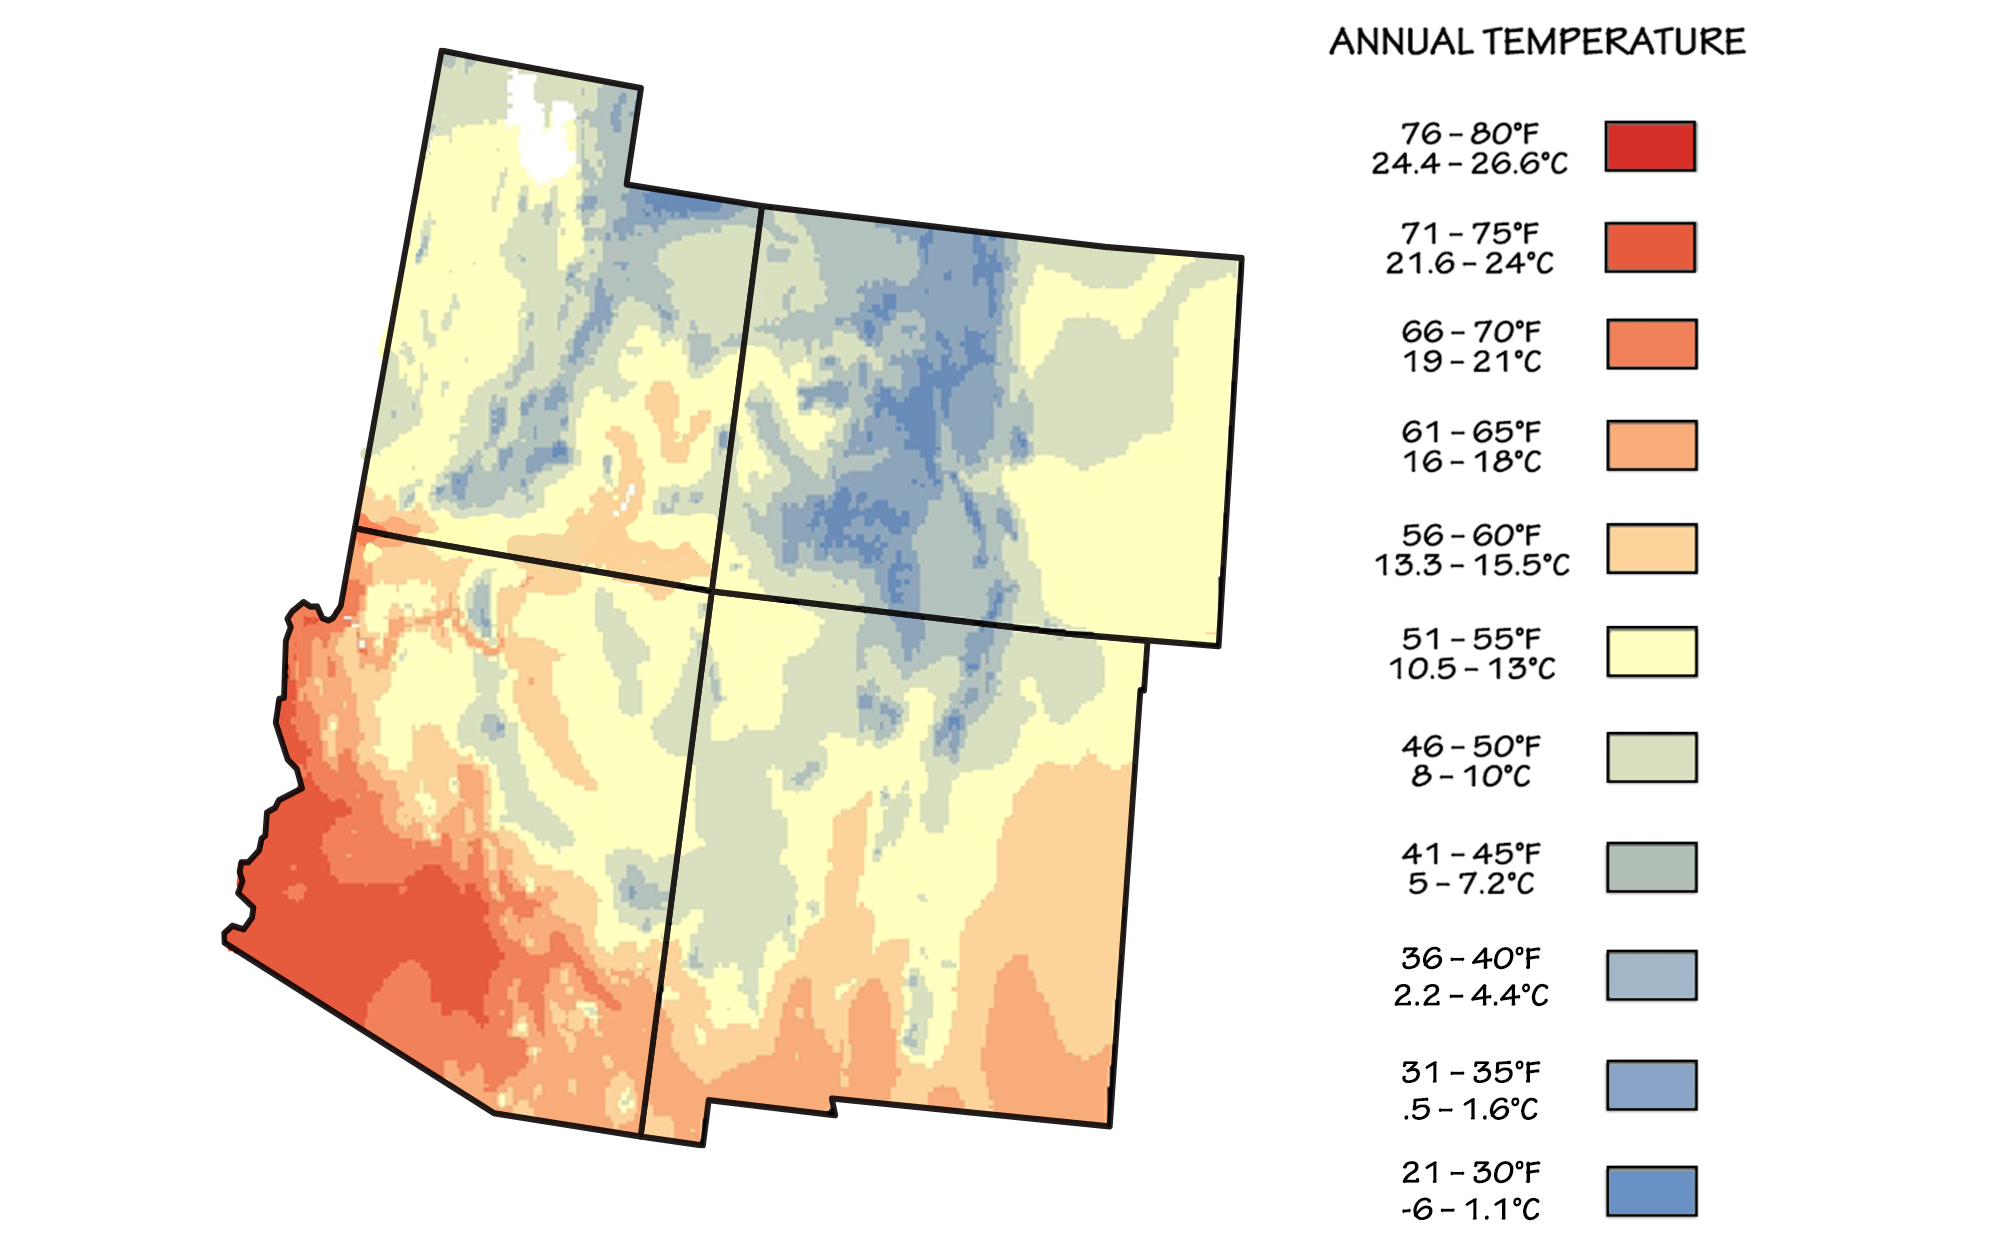 Map showing the four southwestern states (Arizona, Colorado, New Mexico, and Utah) shaded by color to show temperature.  The coolest regions average from -5 to 1.1 degrees Celsius (21 to 30 degrees Fahrenheit), whereas the warmest are 24.4 to 26.6 degrees Celsius (76 to 80 degrees Fahrenheit).